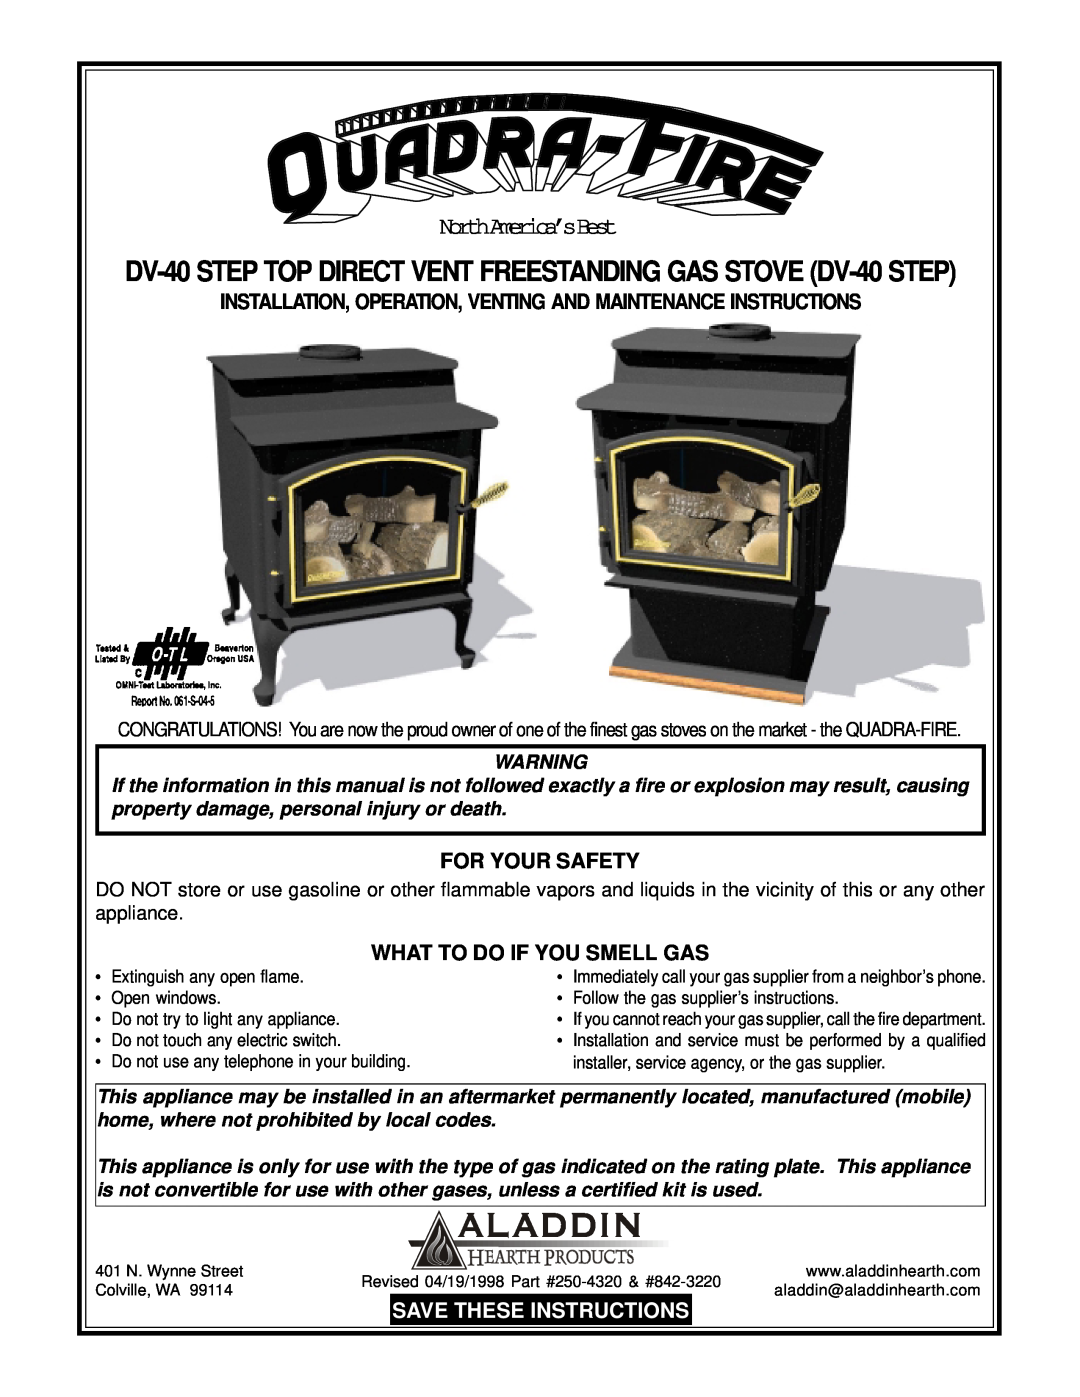 Quadra-Fire DV-40 manual For Your Safety, What To Do If You Smell Gas, NorthAmerica’sBest, Save These Instructions 